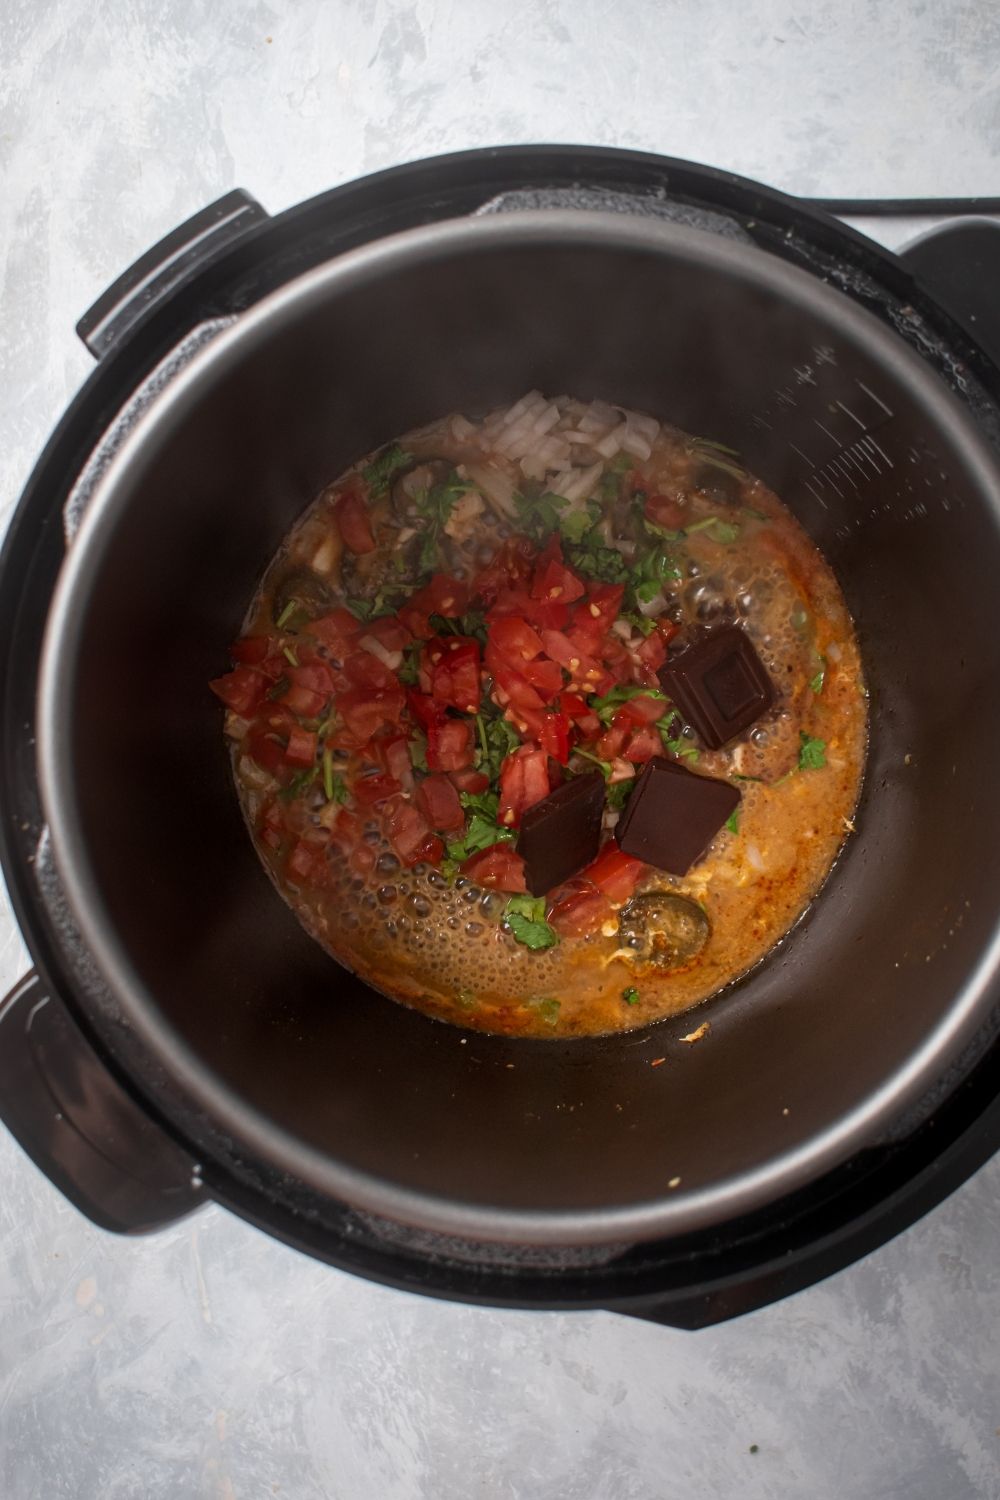 An instant pot filled with enchilada sauce ingredients.